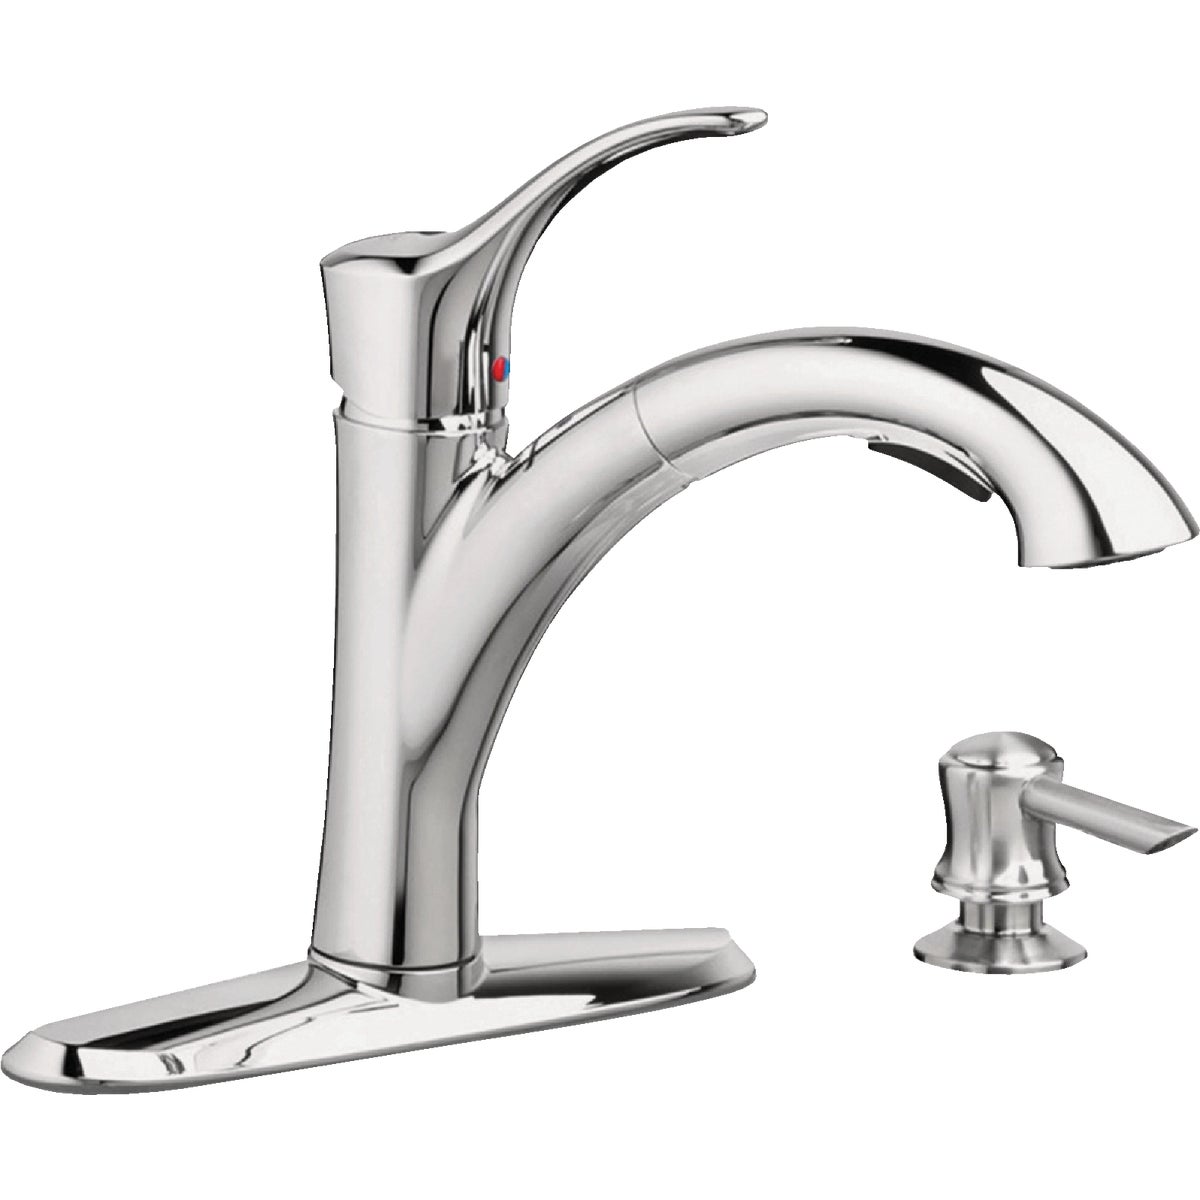 American Standard Mesa 1-Handle Lever Pull-Down Kitchen Faucet with Soap Dispenser, Chrome